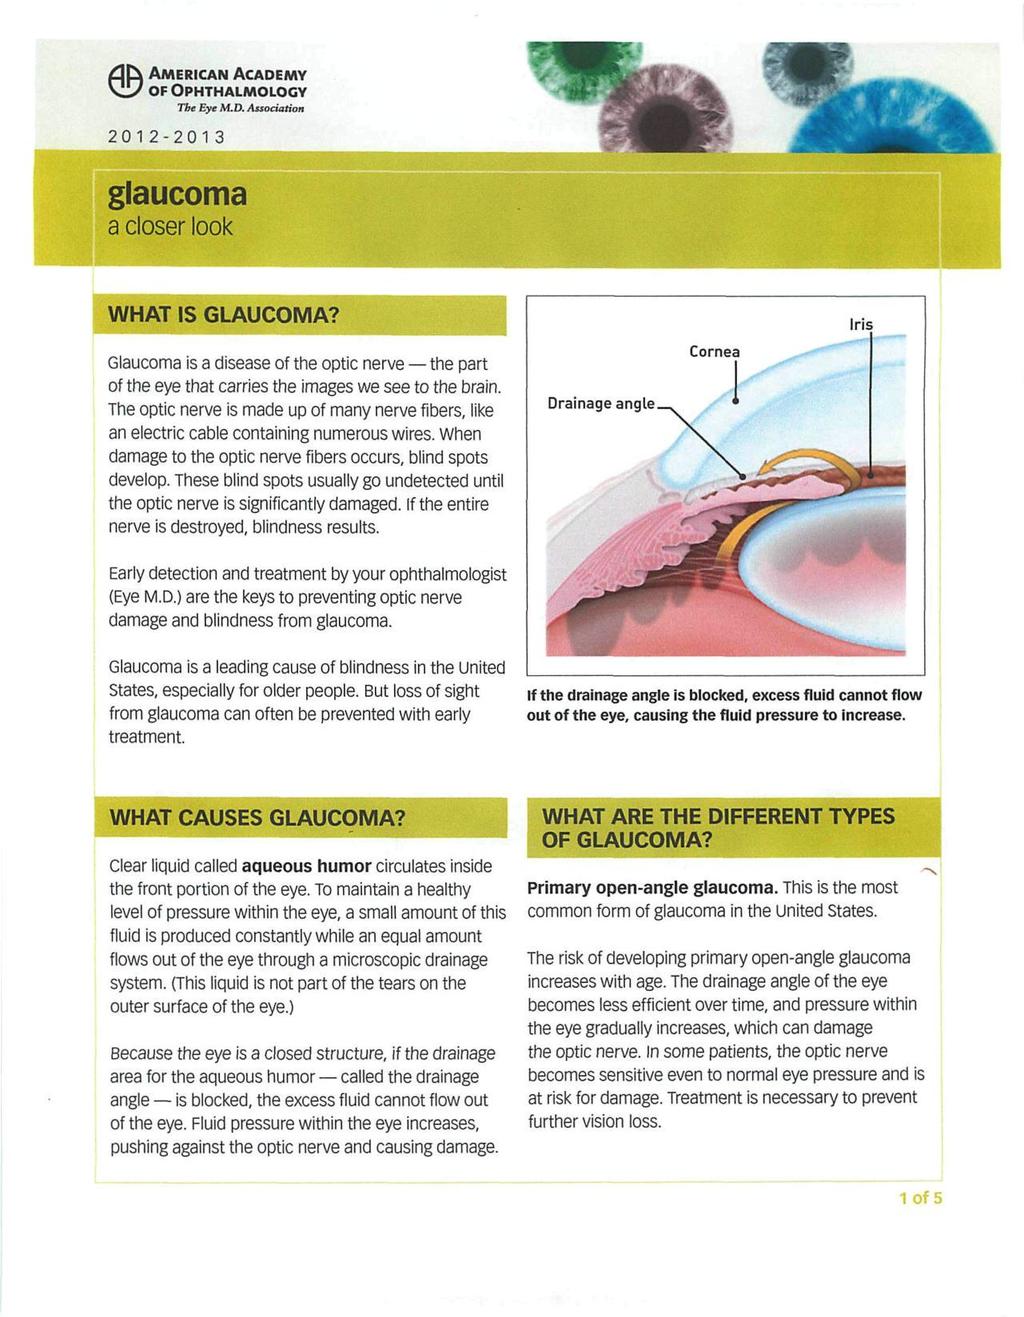 0AMERICAN ACADEMY OF OPHTHALMOLOGY The Eye M.D. Association 2012-2013 glaucoma a closer look WHAT IS GLAUCOMA?